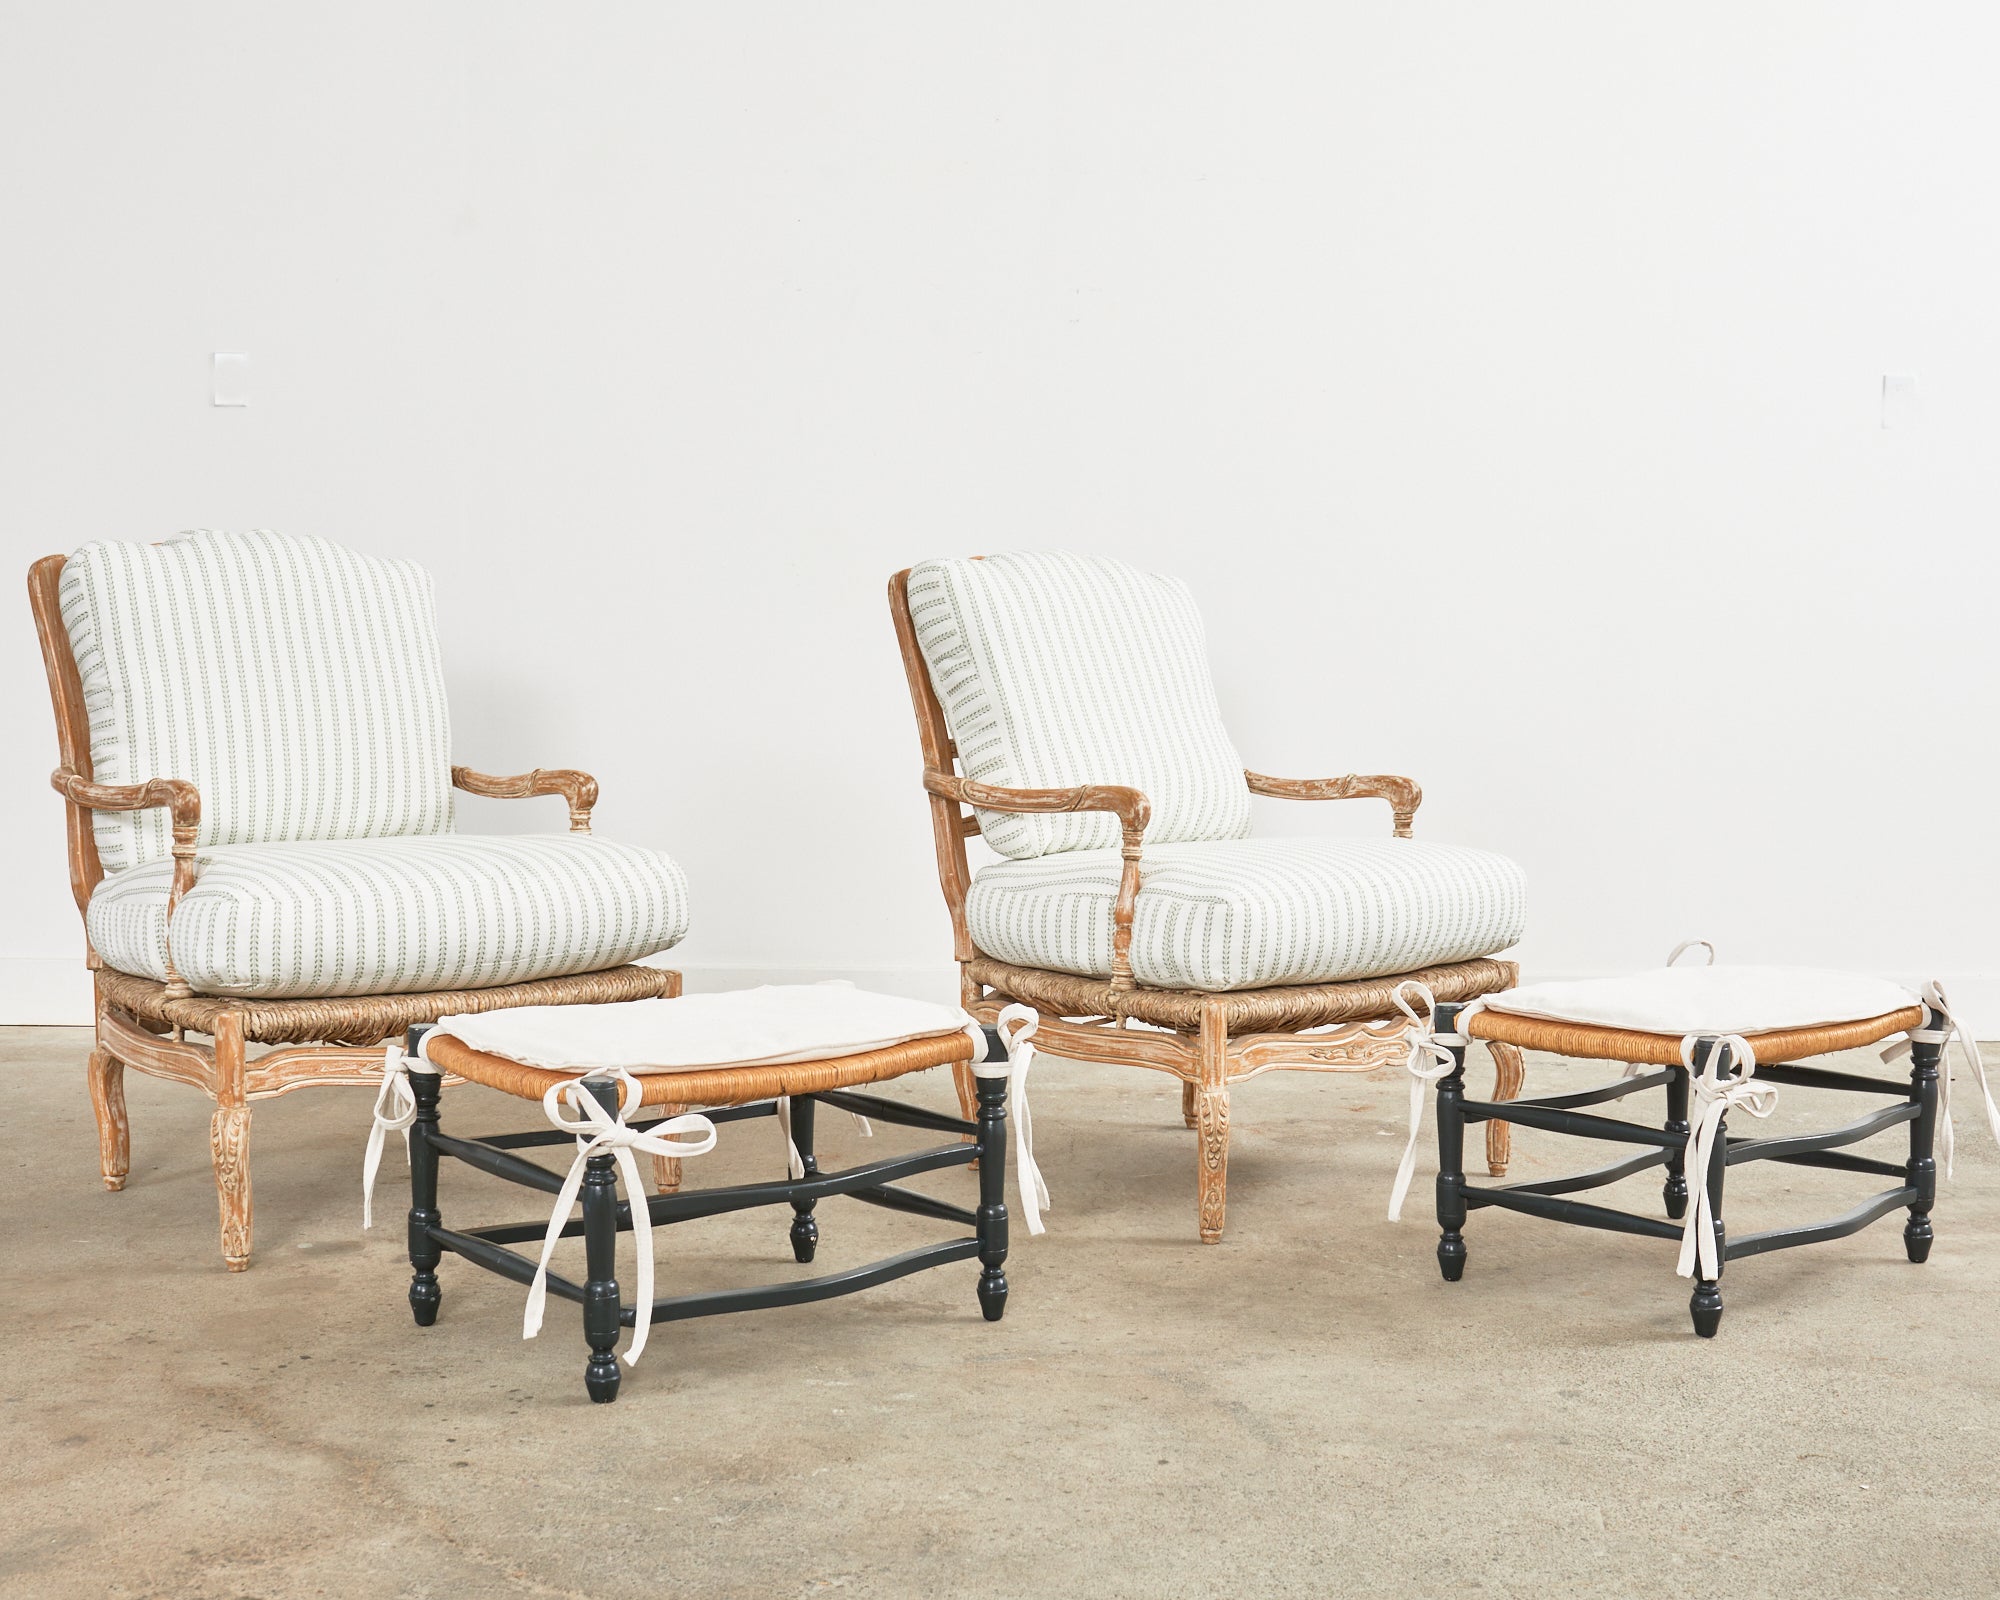 Bespoke pair of ladder back rush seat fauteuil armchairs or lounge chairs with an made in the French provincial style by William Switzer. Generous proportion frames hand made in Spain featuring a carved fruitwood finished in a white glaze. Fitted